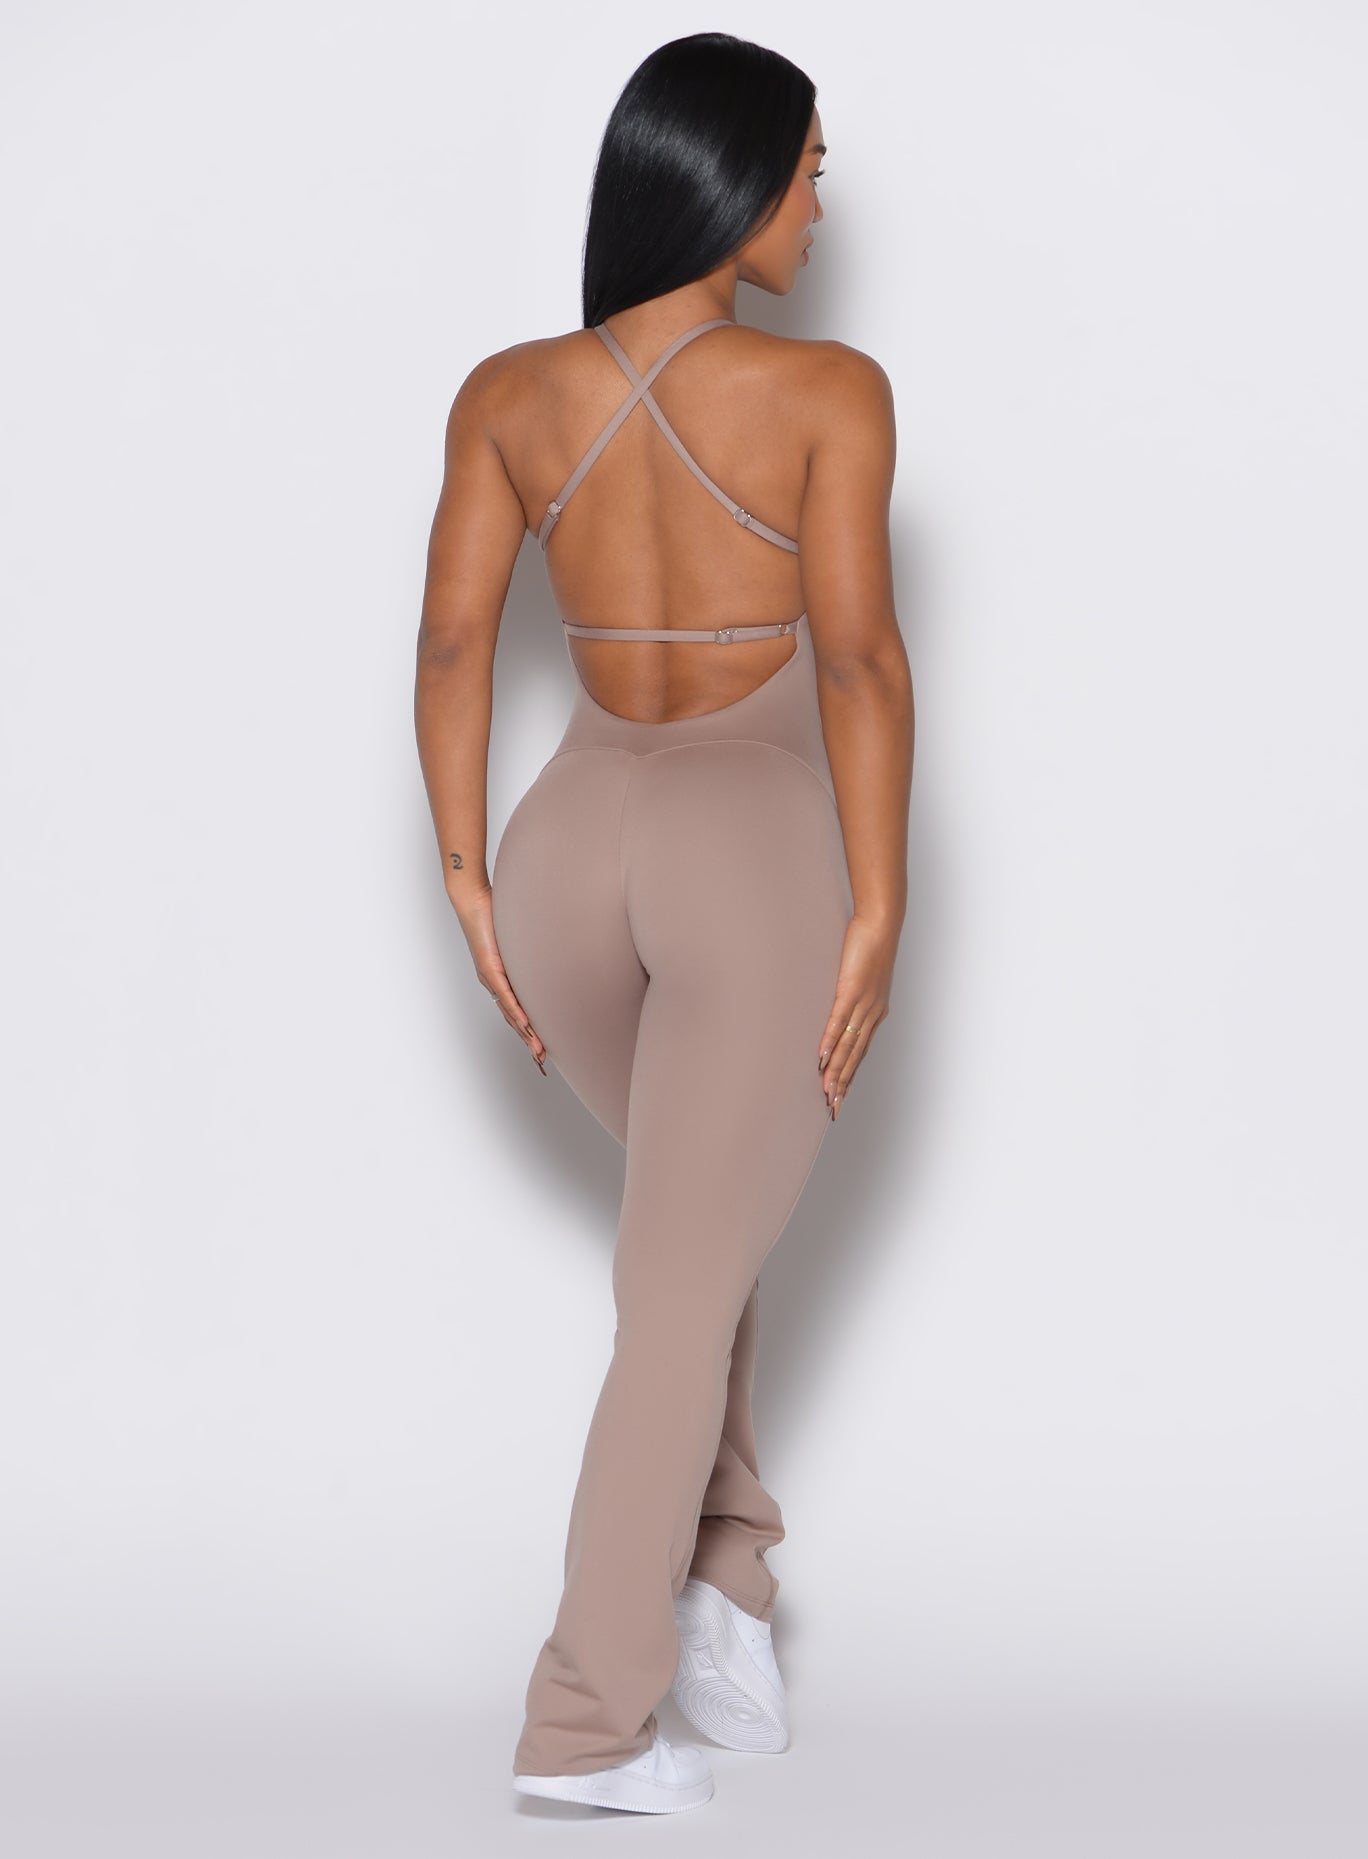 Back profile view of a model facing right wearing the Bombshell Bunny Bodysuit in Clay color.